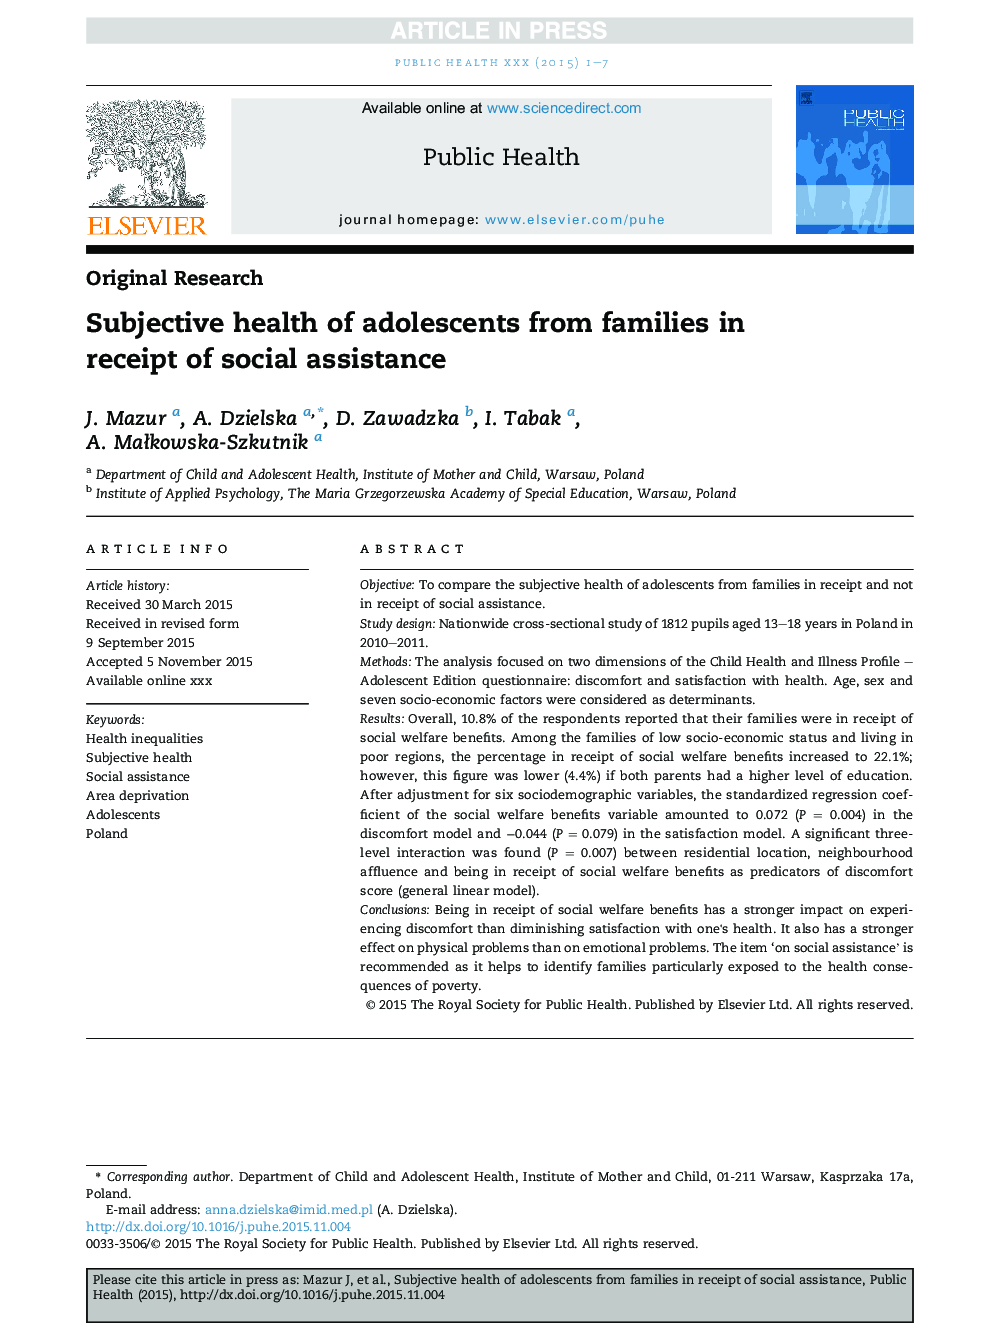 Subjective health of adolescents from families in receipt of social assistance